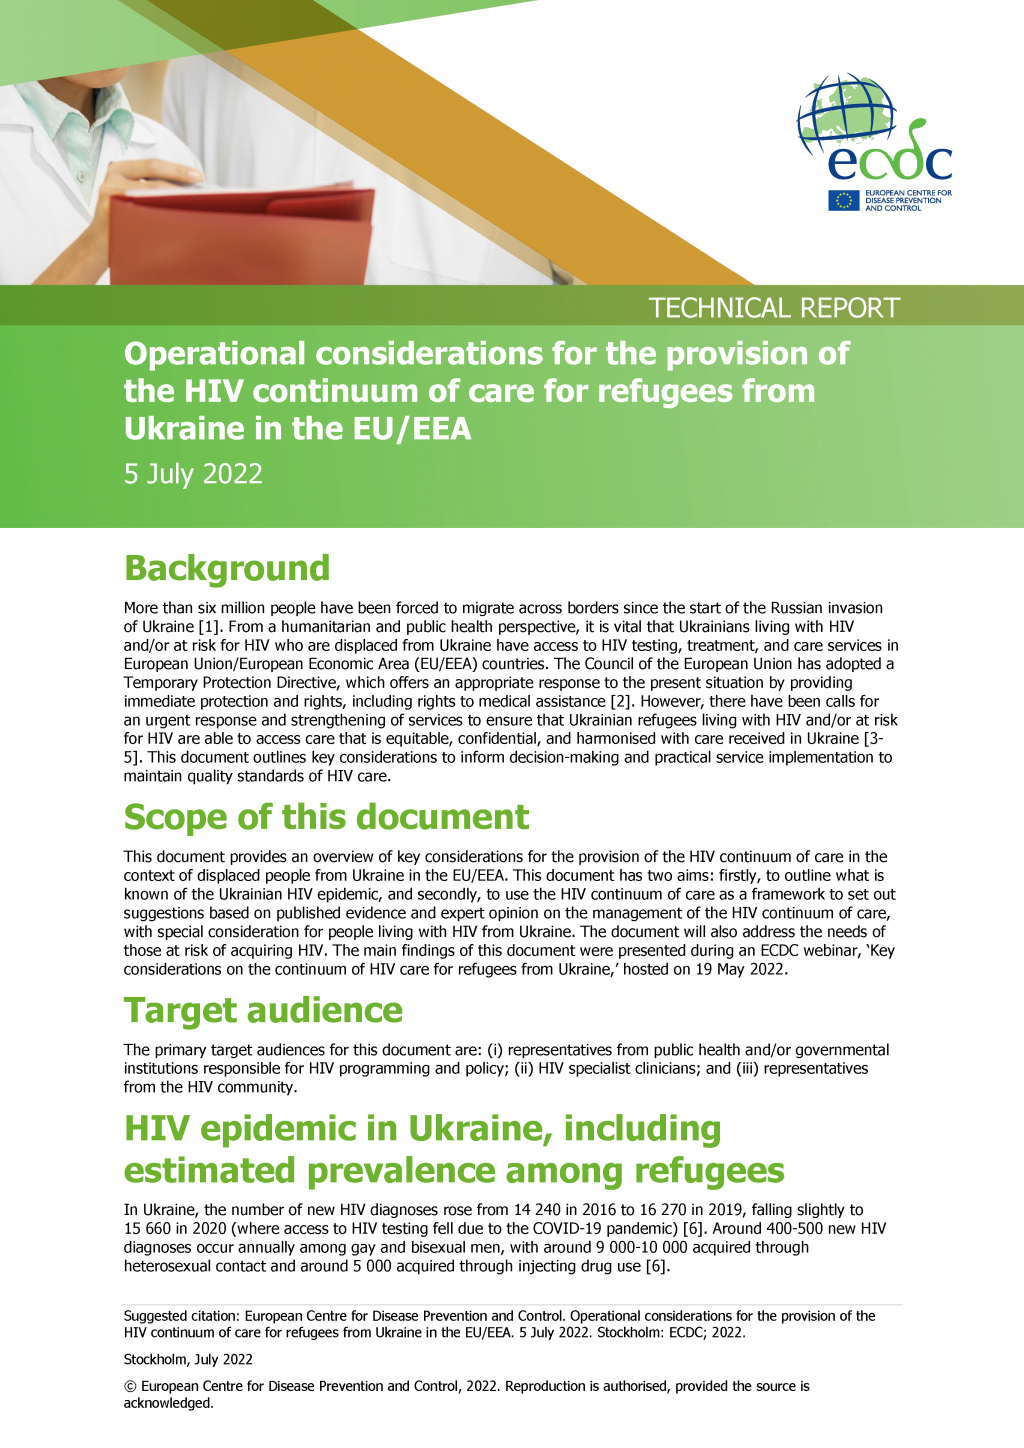 Operational-considerations-provision-HIV-care-for-Ukraine-refugees